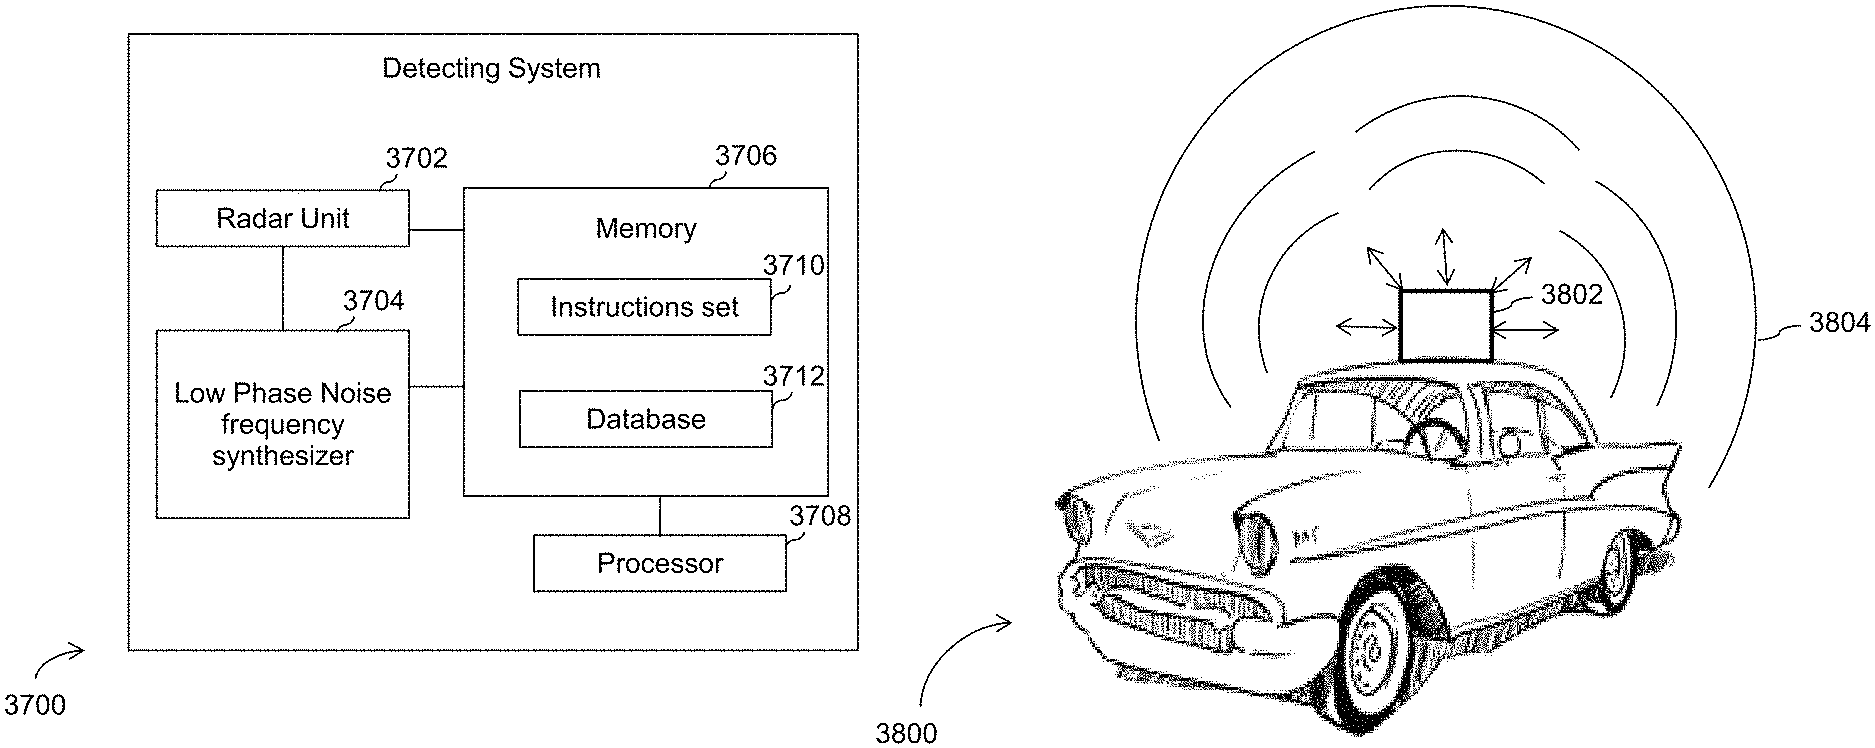 10598764 Autonomous vehicles with ultra-low phase noise frequency